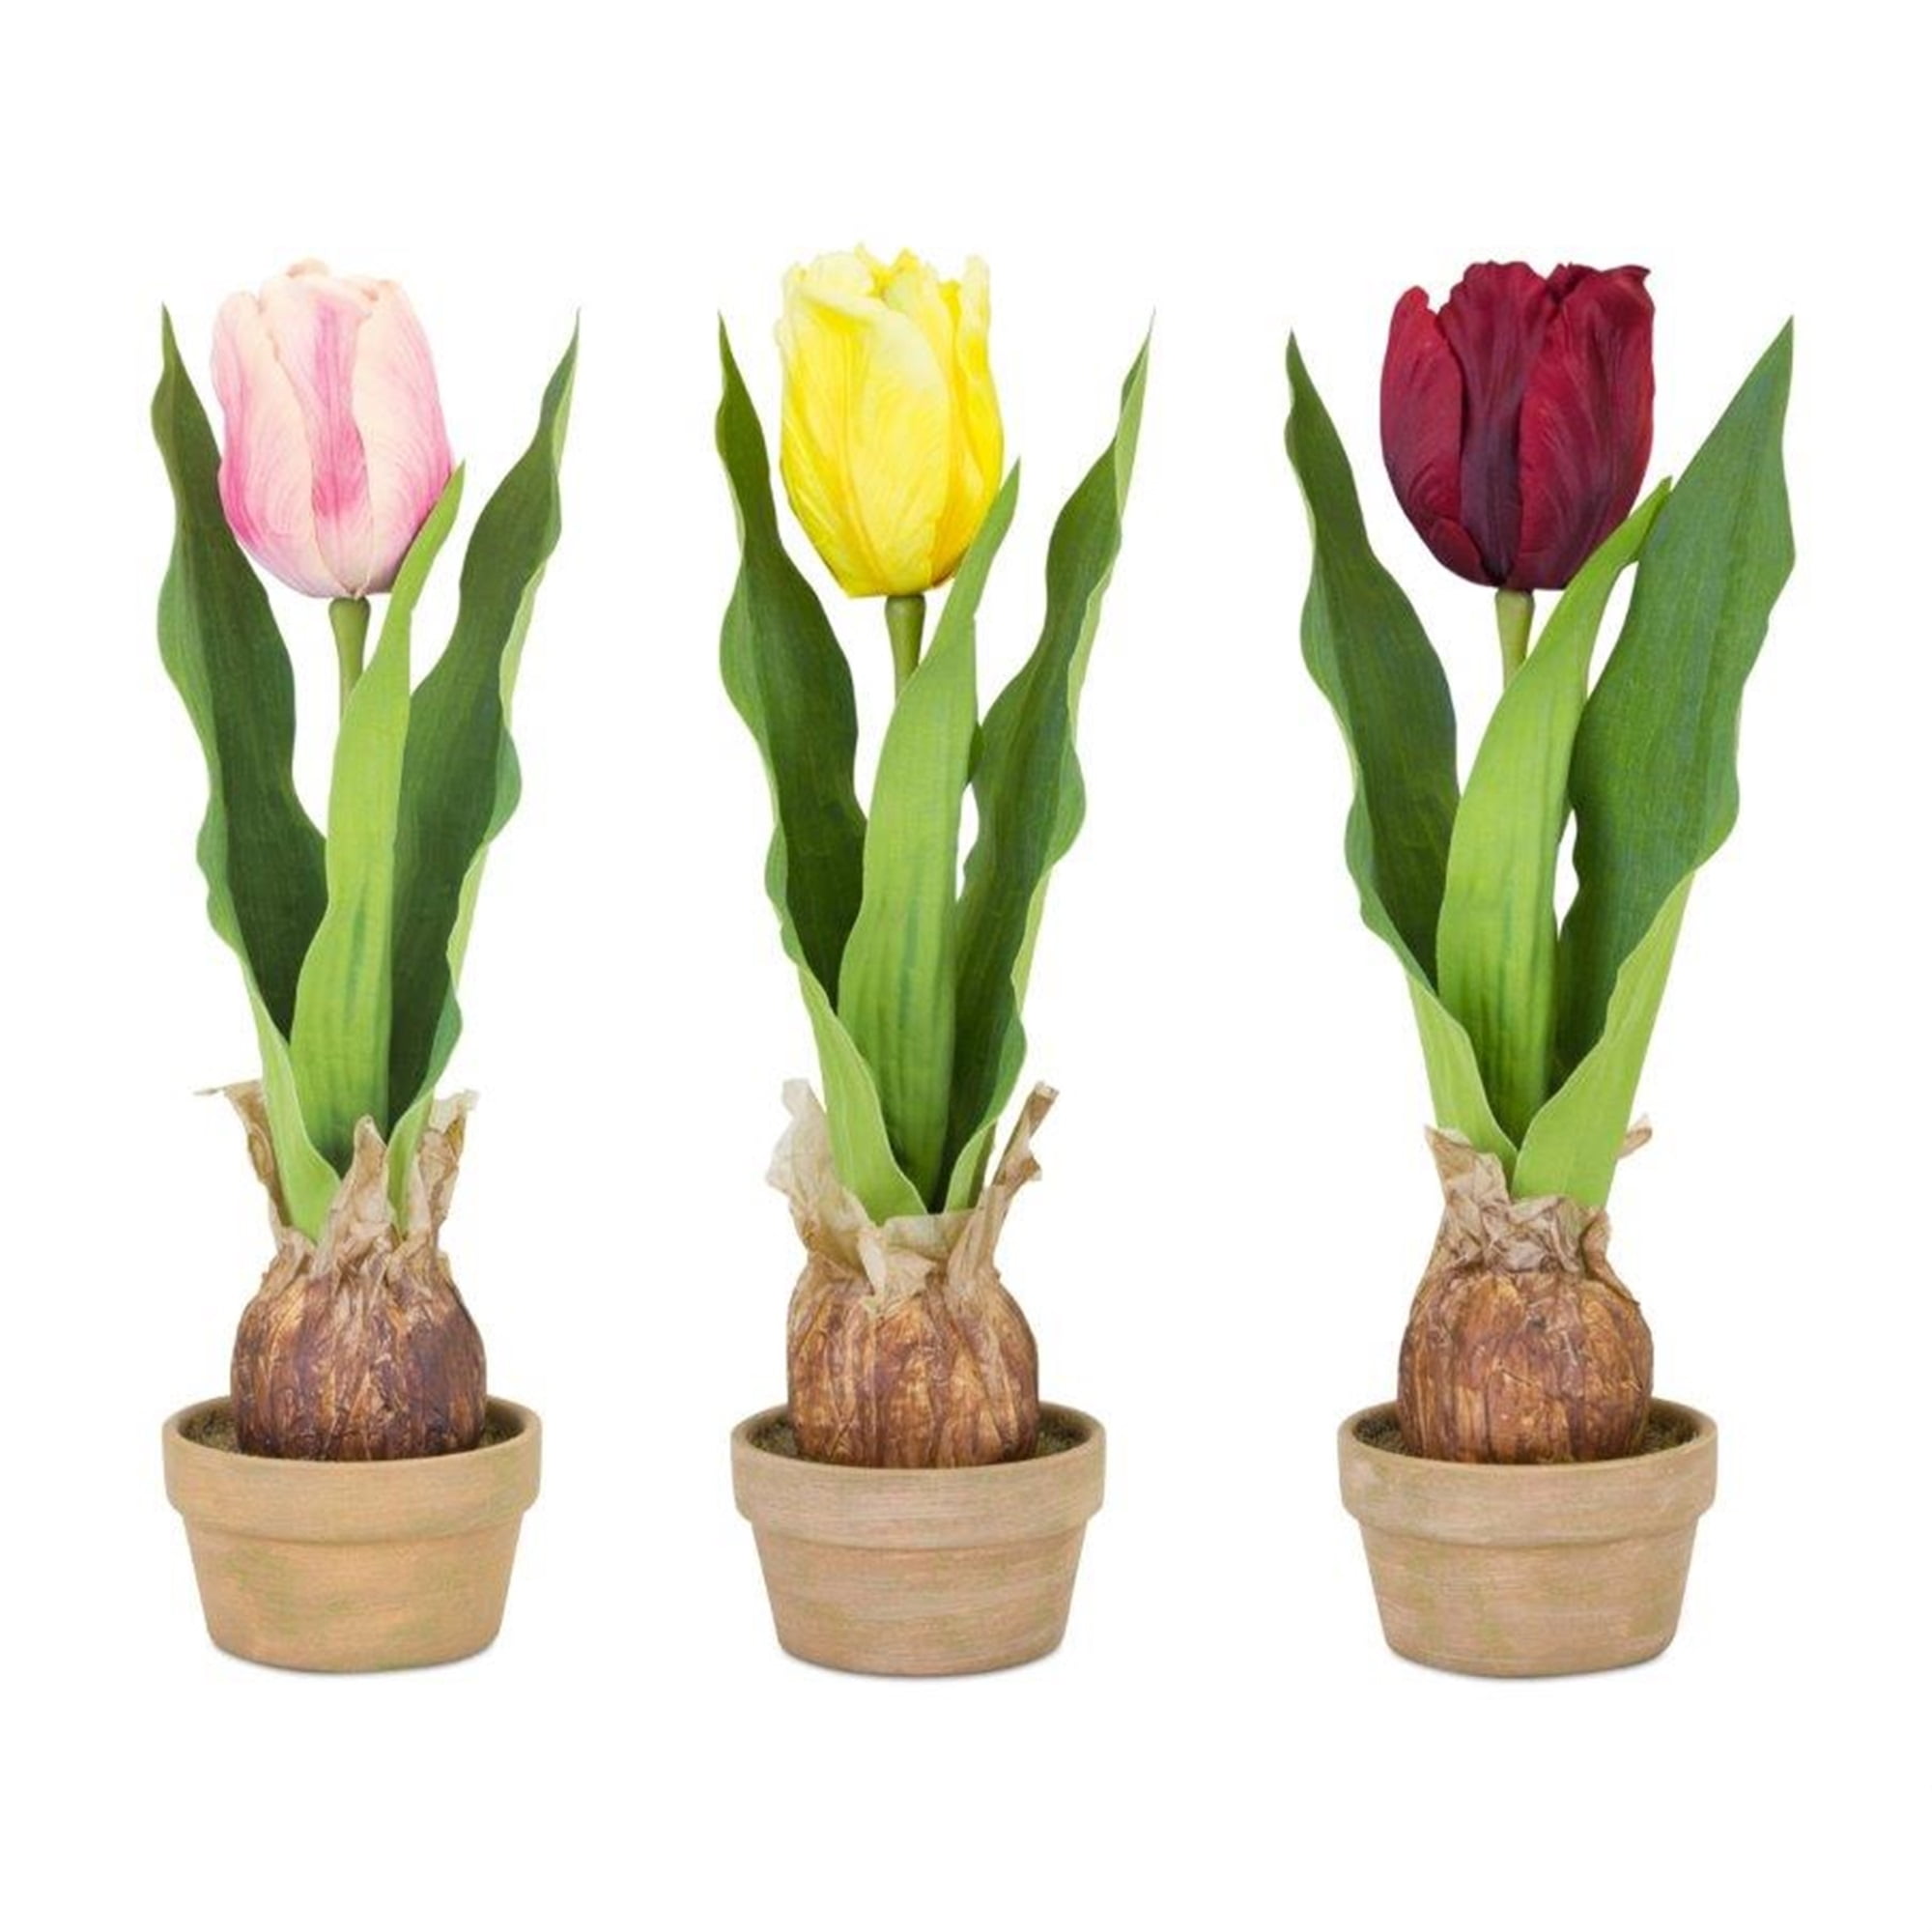 Potted Tulip Bulb (Set of 3) 5.5"L x 13.75"H Polyester/Ceramic